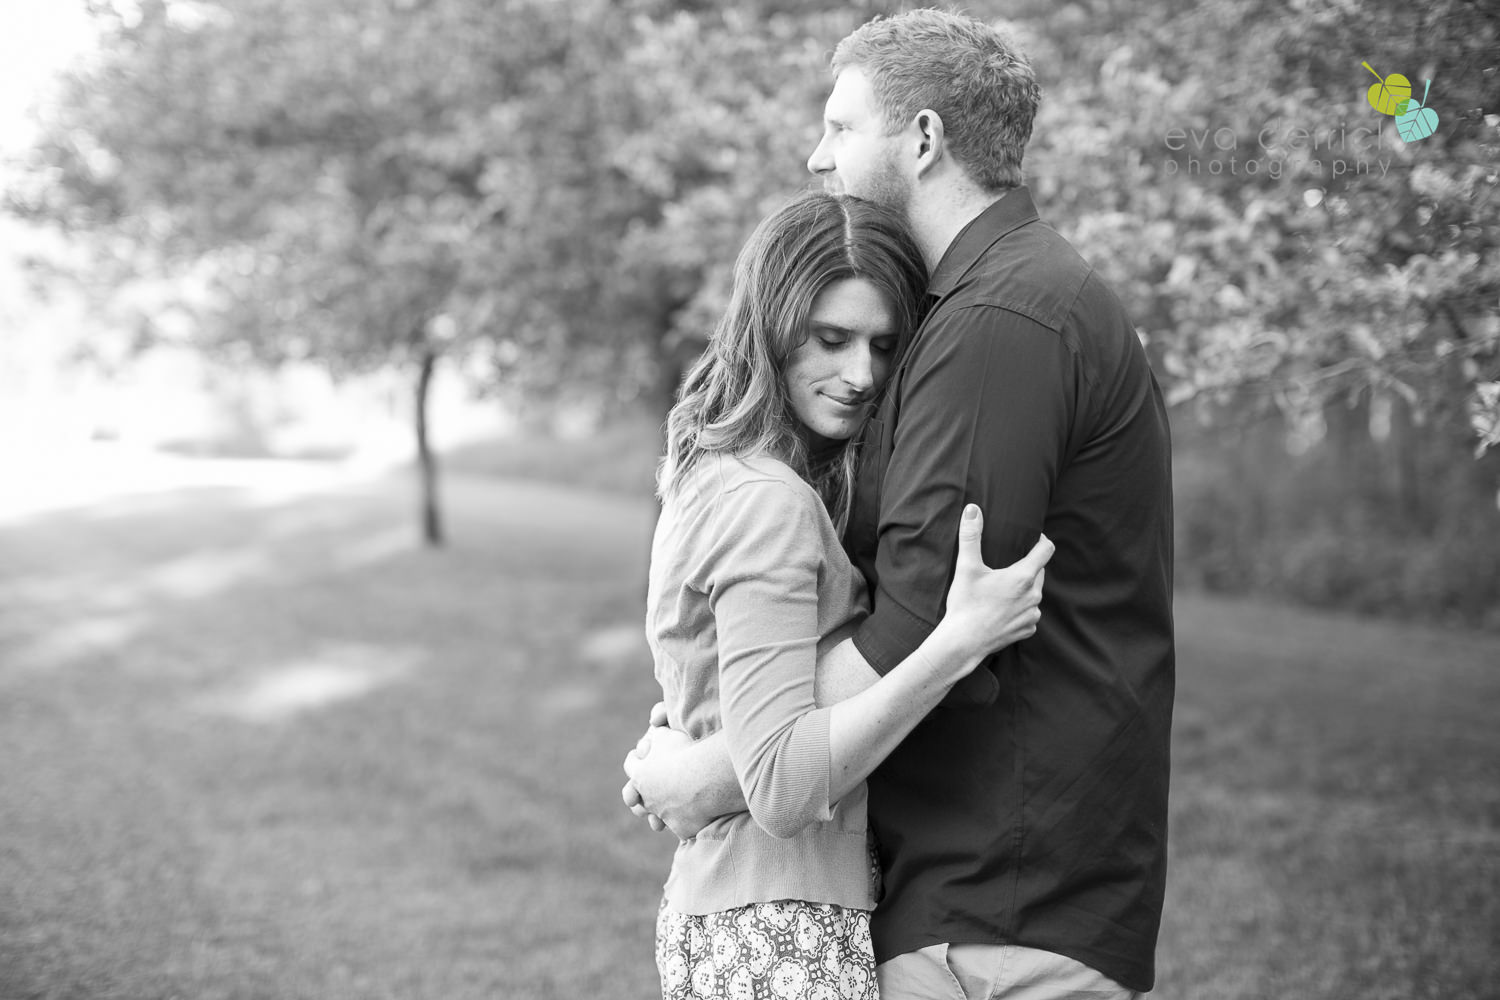 Millgrove-Photographer-Millgrove-Engagement-Session-photography-by-Eva-Derrick-Photography-002.JPG